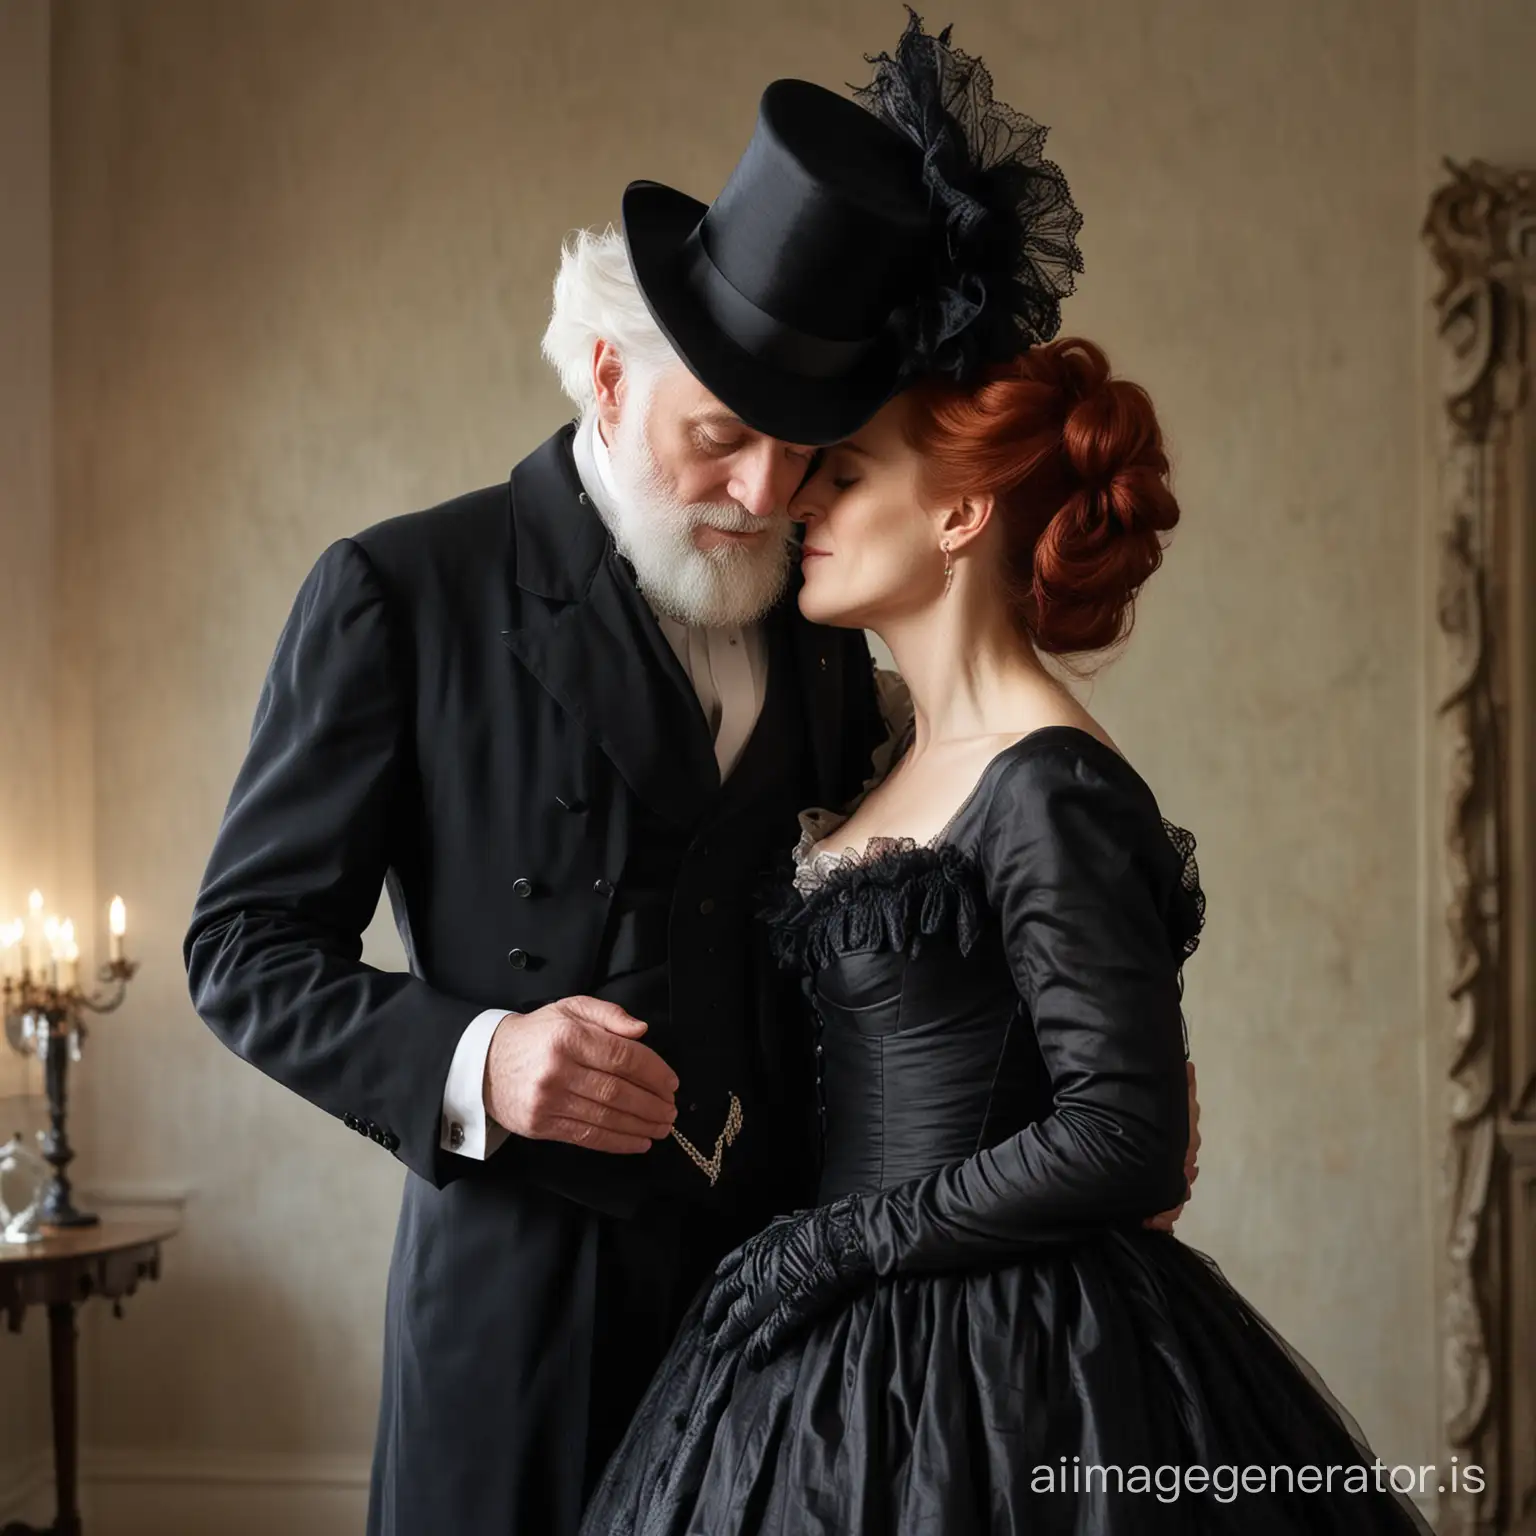 Romantic-RedHaired-Bride-in-Victorian-Dress-Shares-a-Tender-Kiss-with-Her-Elderly-Groom